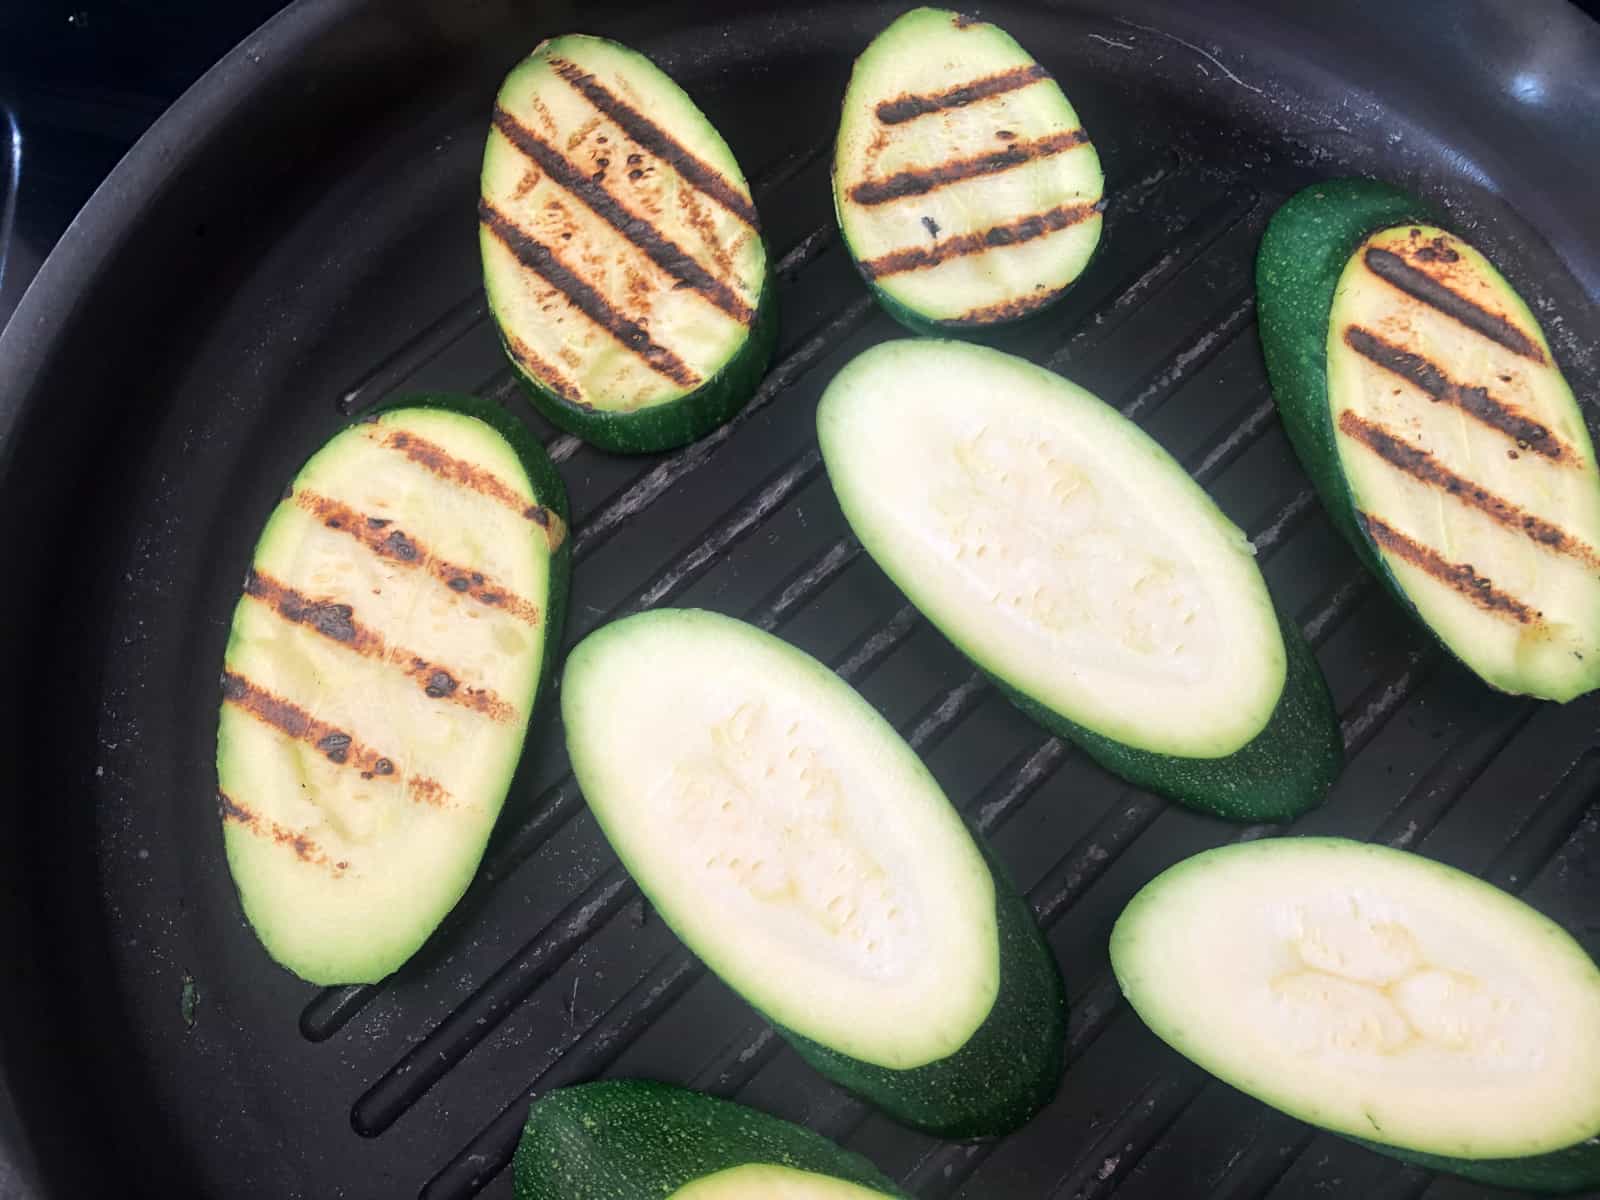 Slices of courgettes grilling in a pan.